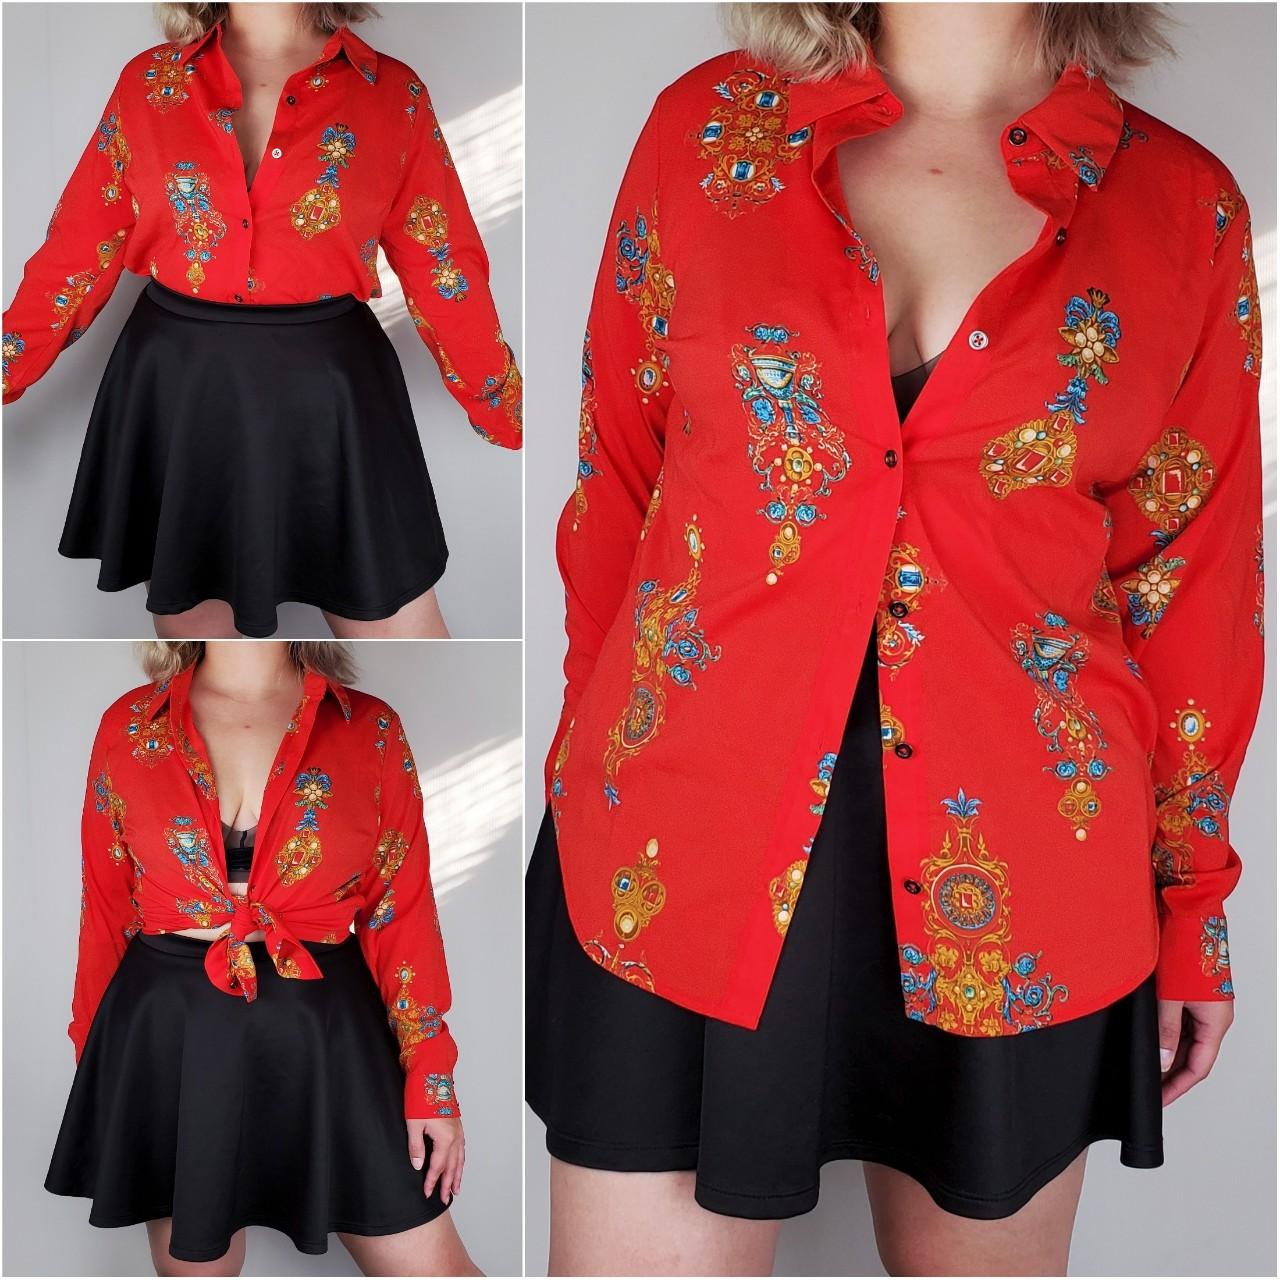 Women's Red and Gold Blouse (3)